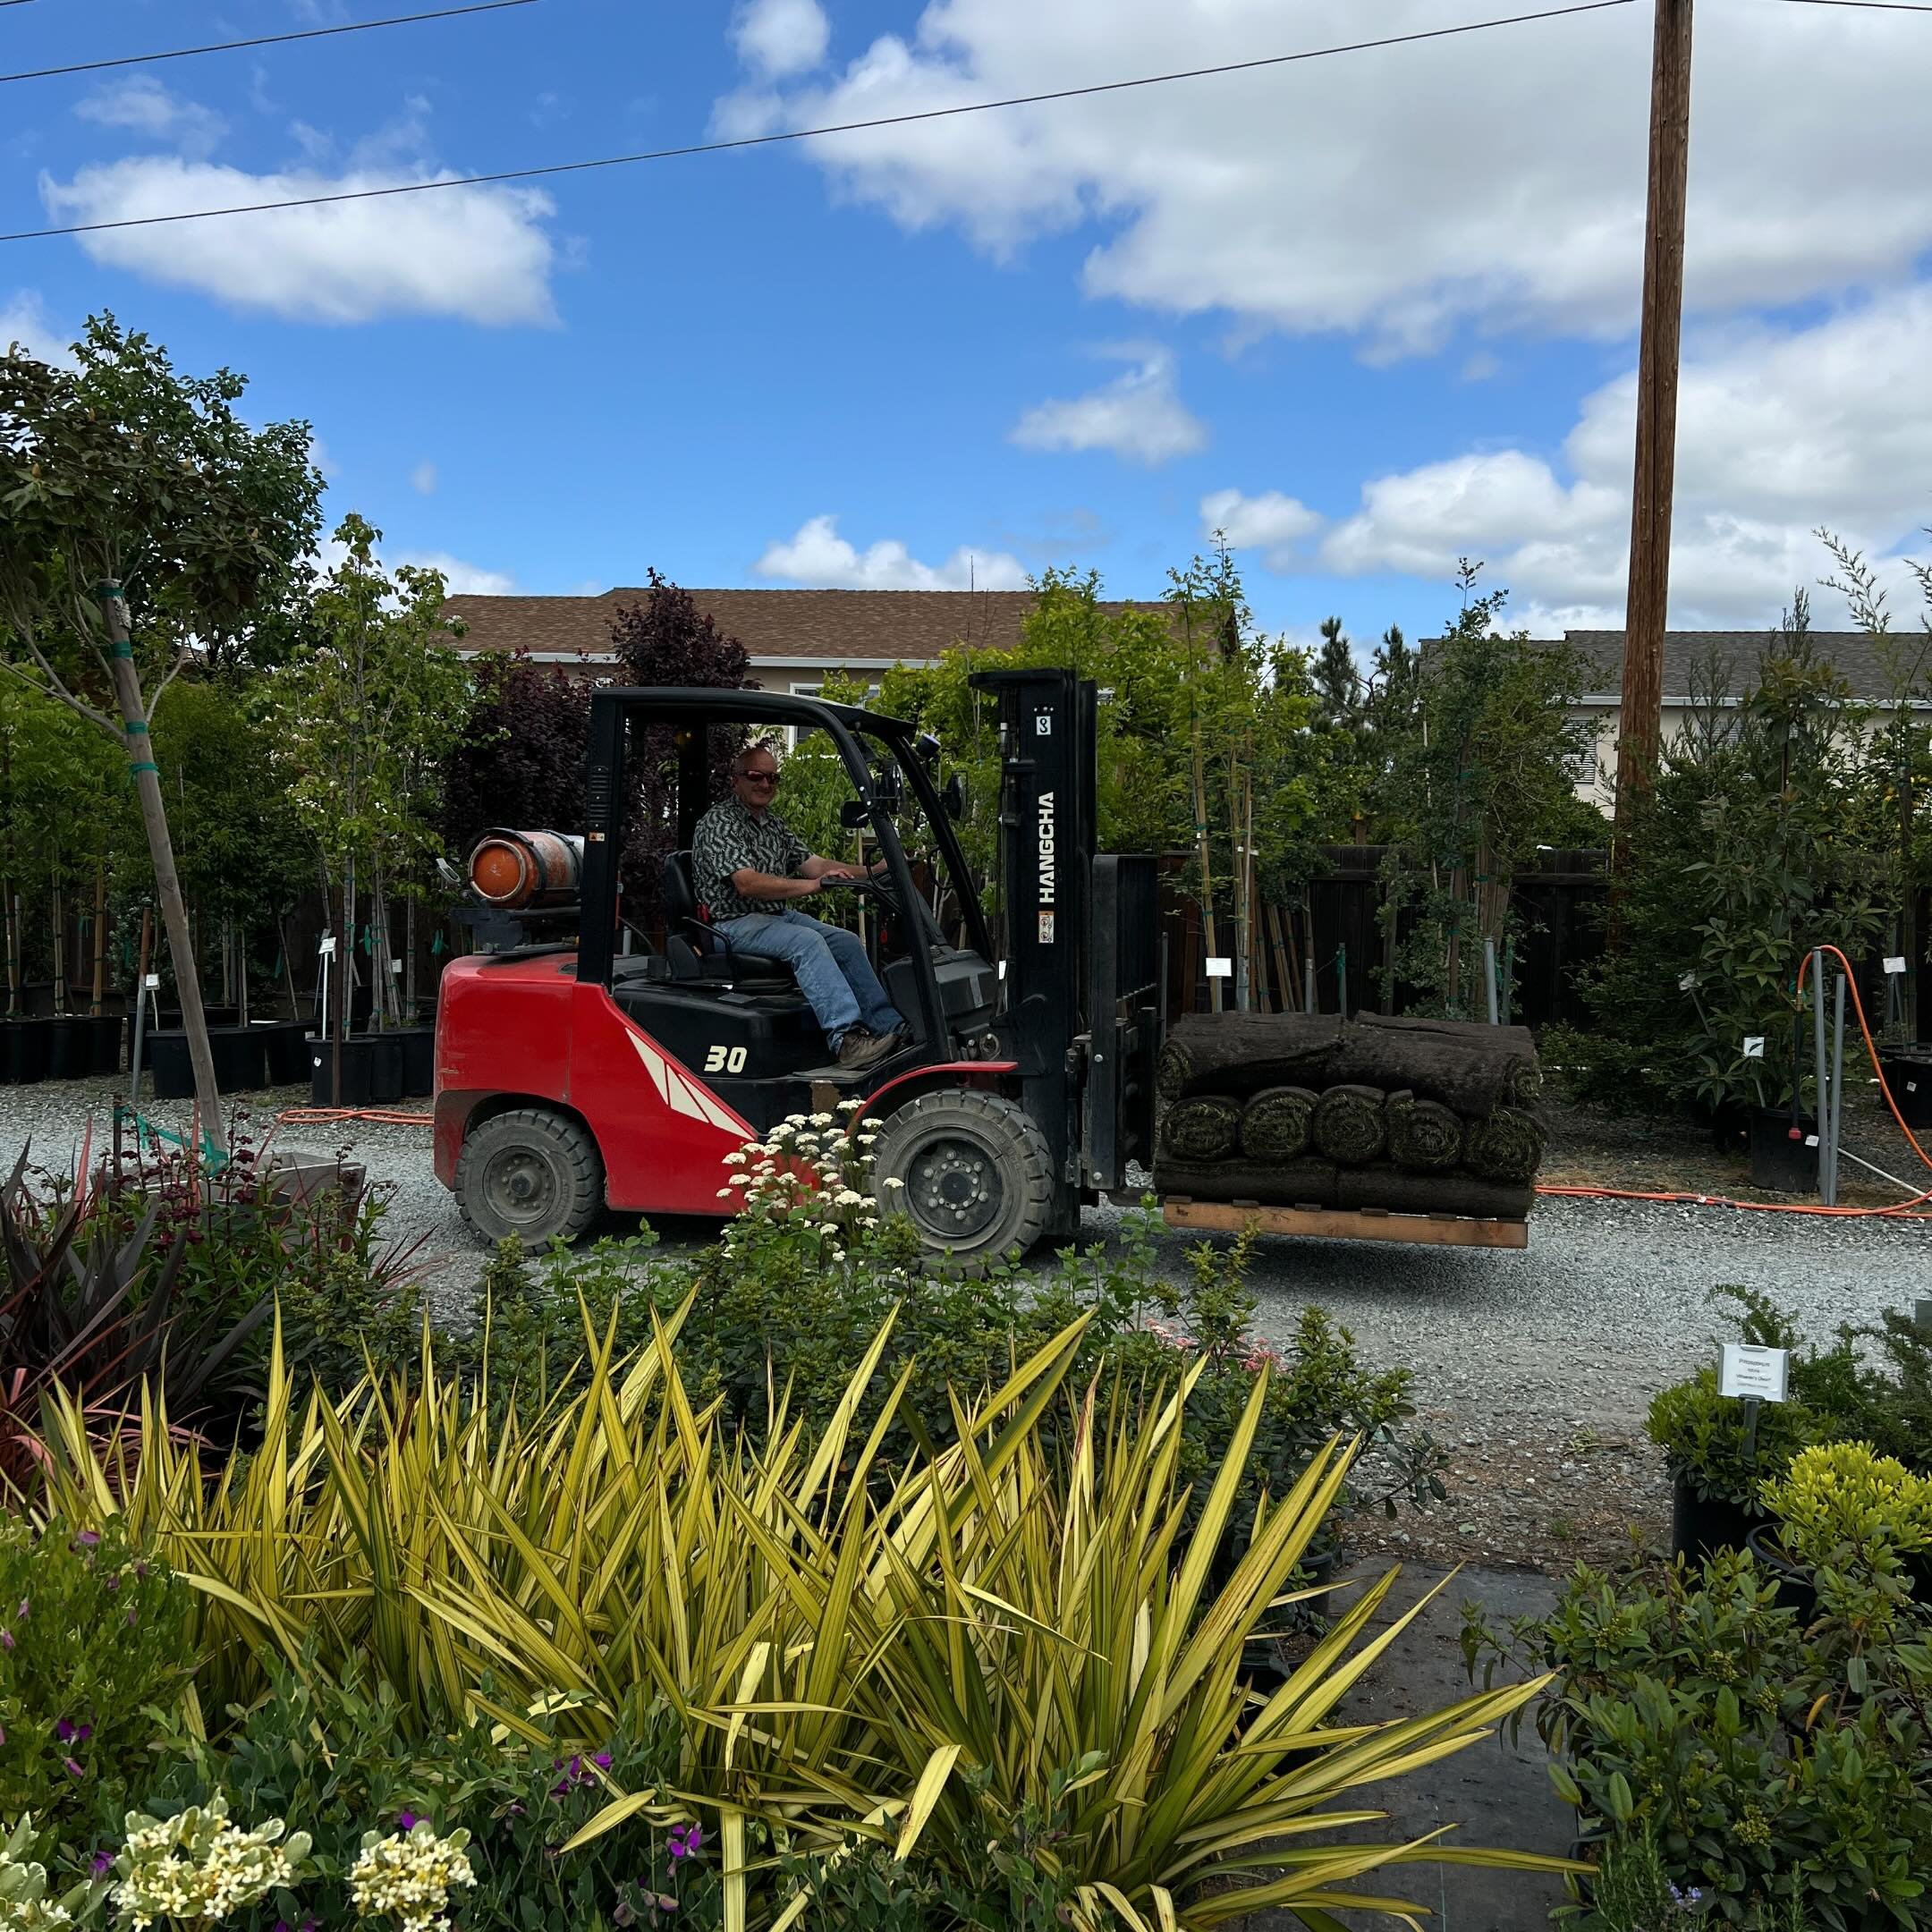 A perfect spring day in San Jose - here comes Anthony driving rolls of sod to the back of the nursery! 🚜

Have you picked out your spring plants yet? What&rsquo;s on your list? 🌸🏡

#capitolwholesalenursery #wholesaleplants #californiagardens #spri